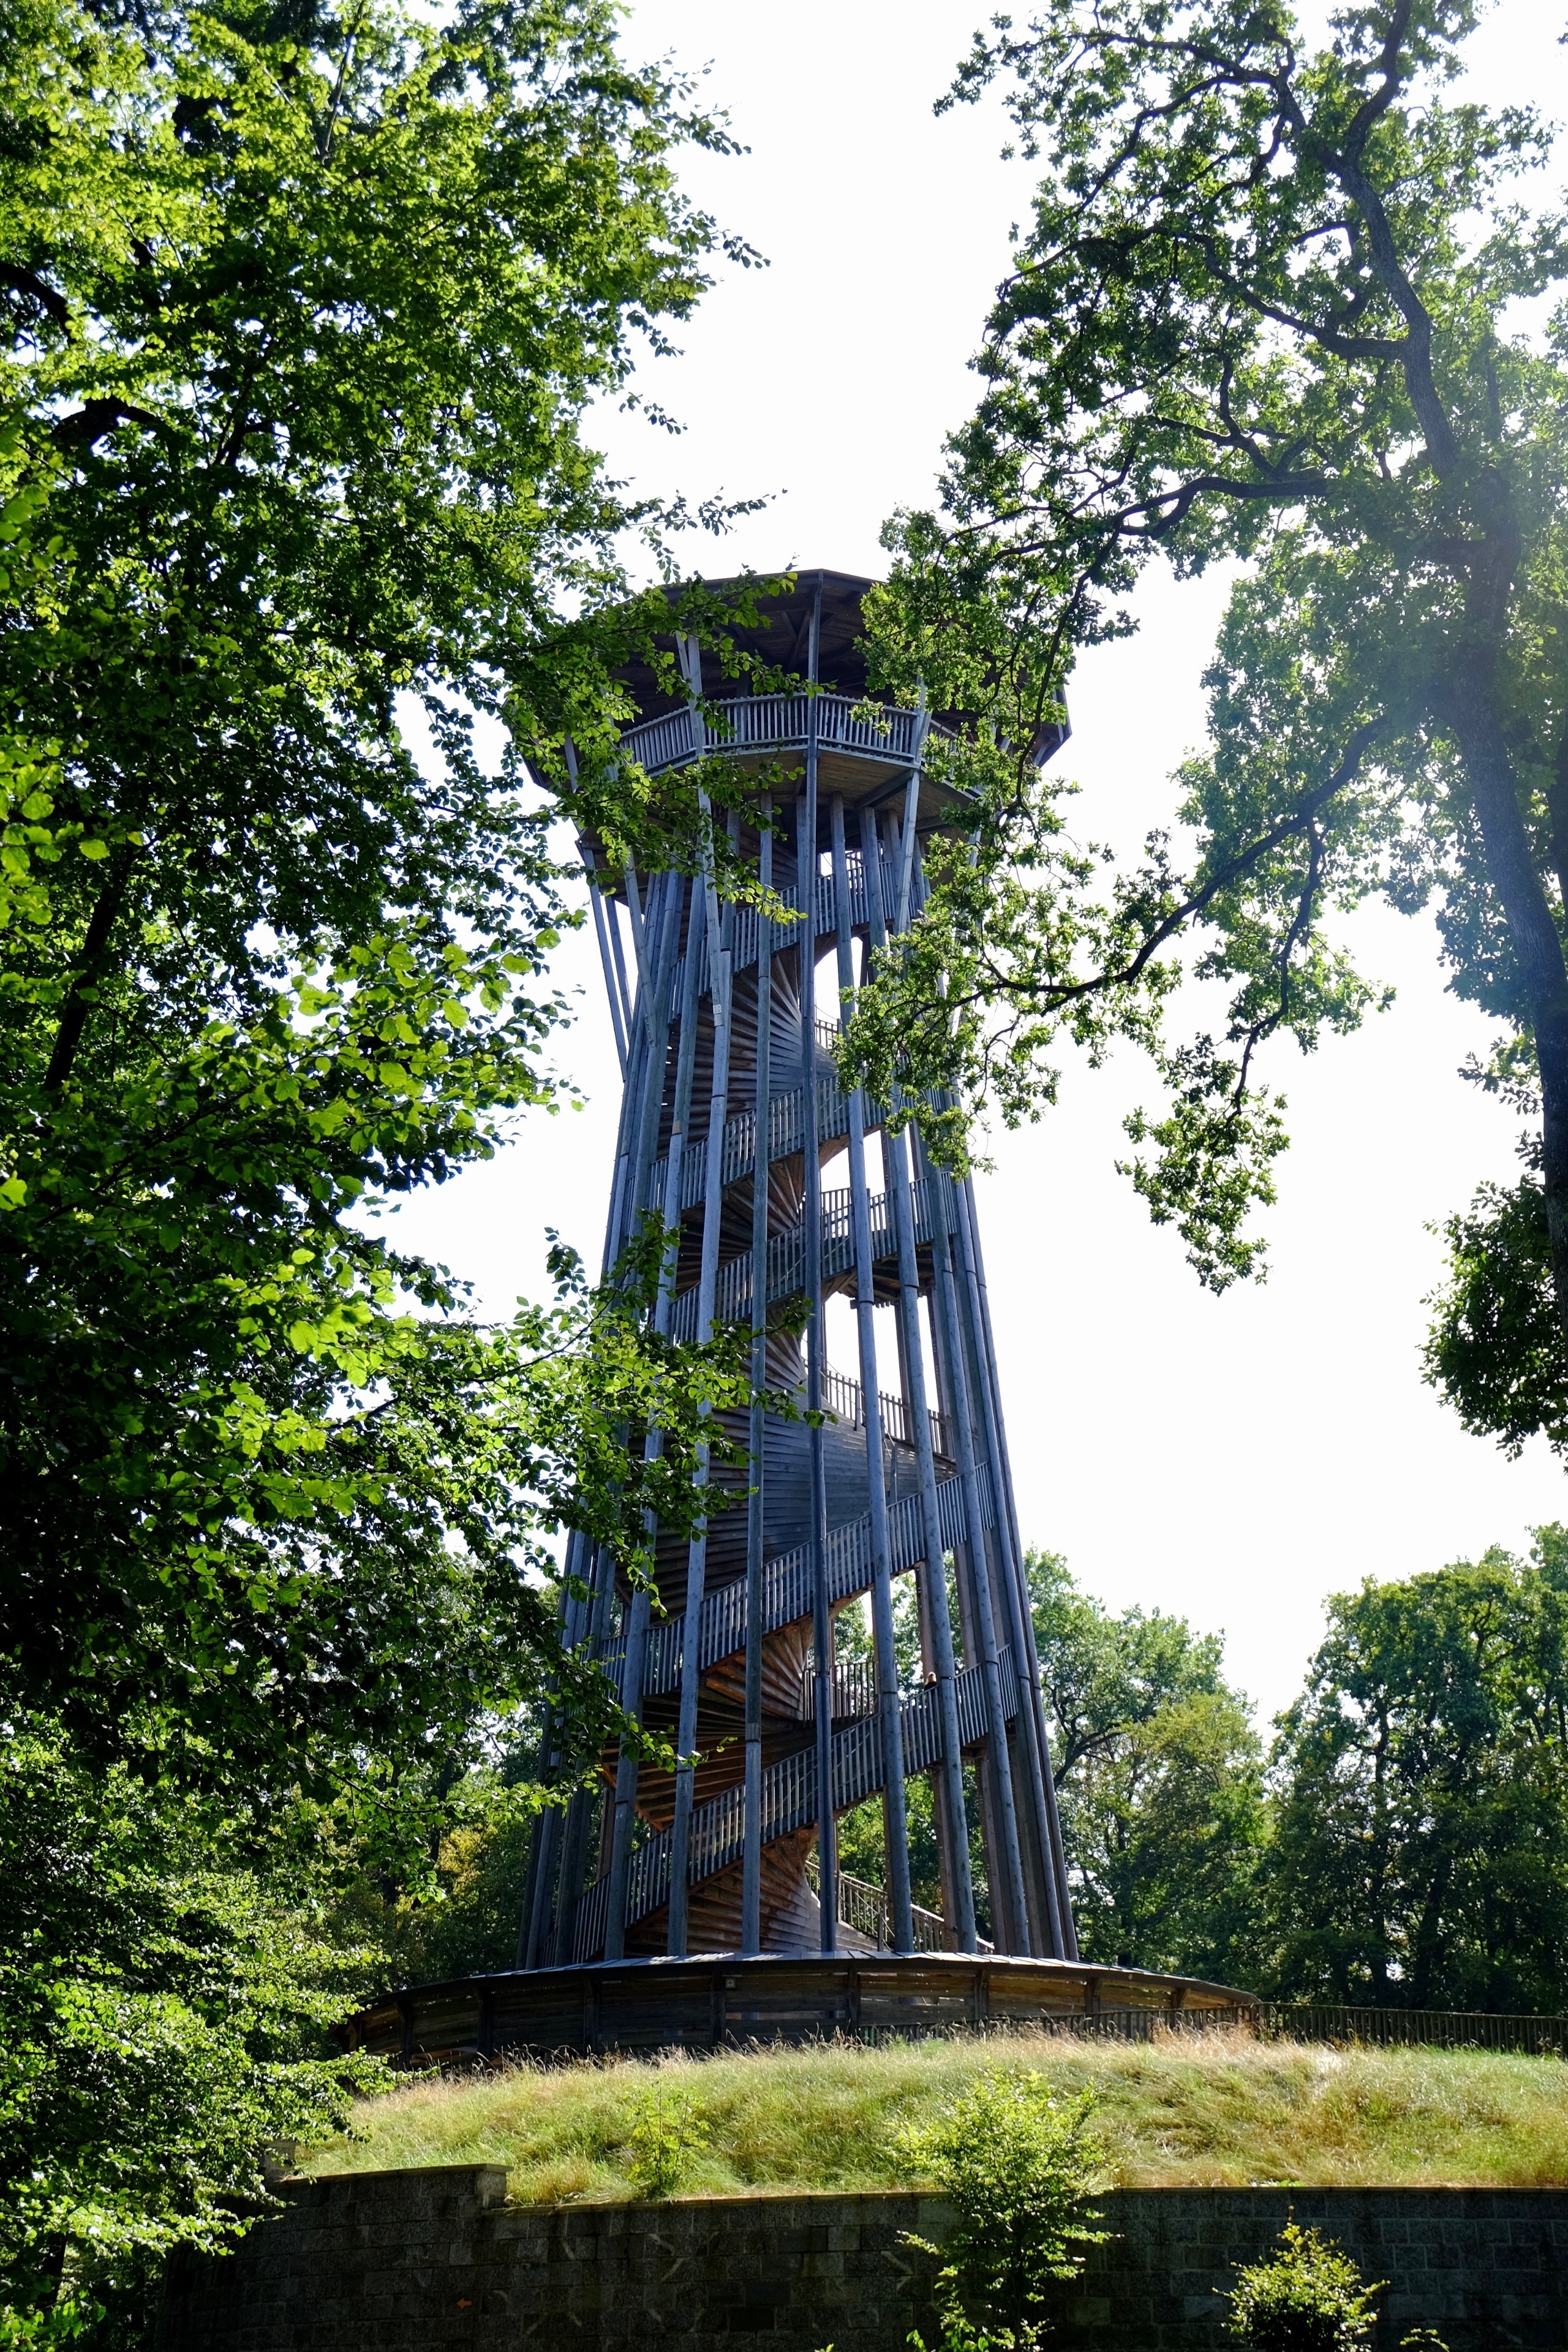 The tower of the Sauvabelin park is overlooking the city of Lausanne.  A little 5 minutes stroll in the forest brings you to the tower. Going up to the top brings you at 700m above sea level (or 328m above the Léman level), and you are about 4m higher than if you were at the top of the Eiffel Tower. The view over the city, the lake and the Alps is splendid!